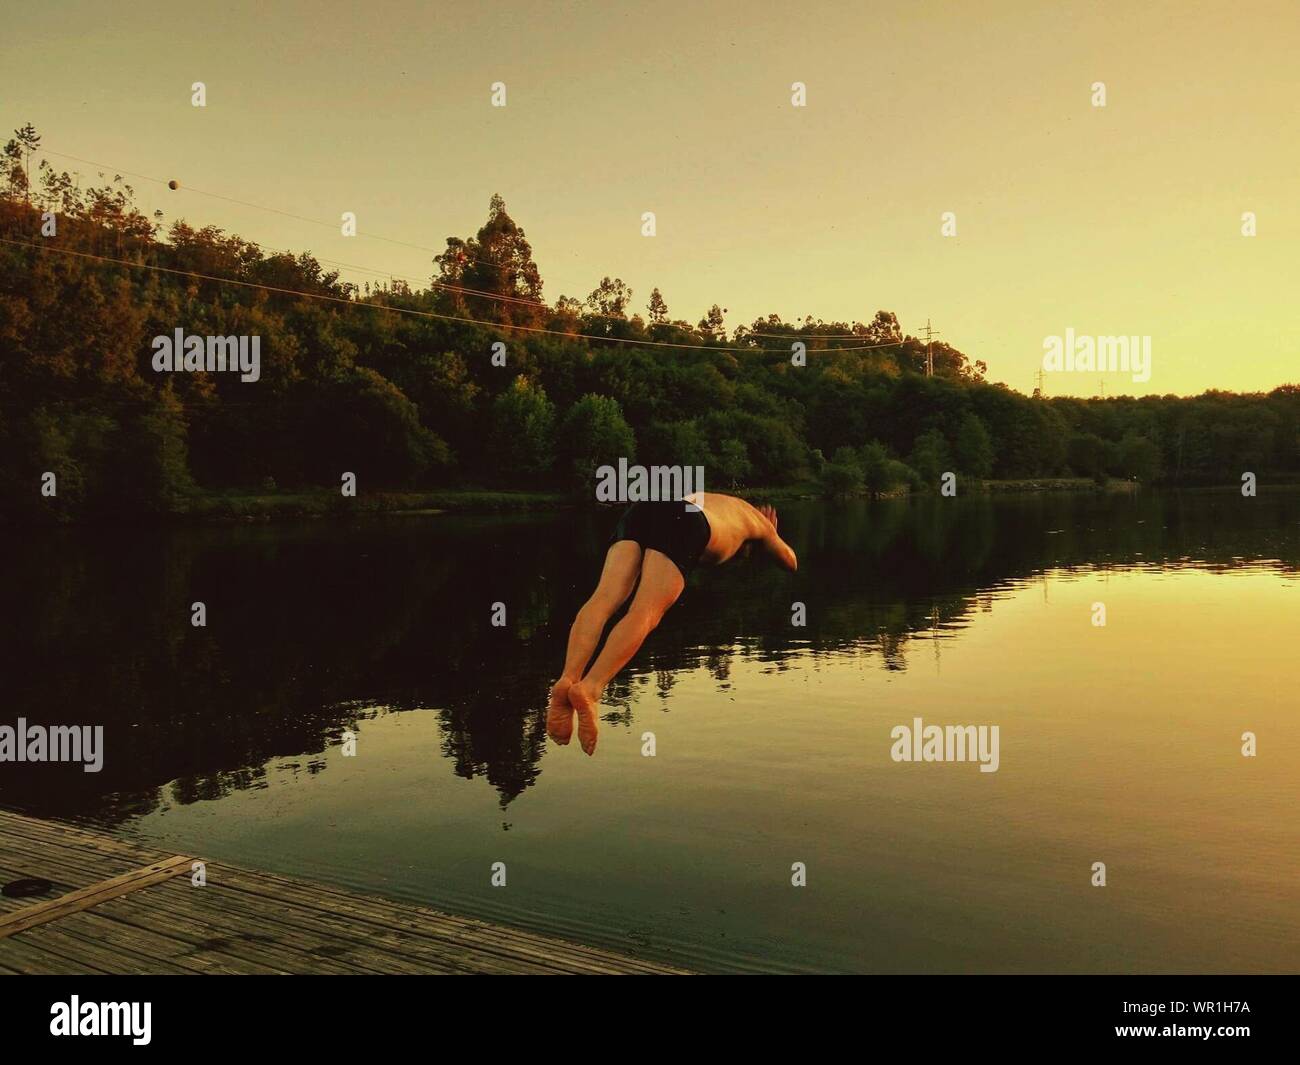 Man Diving Into Lake Against Clear Sky During Sunset Stock Photo